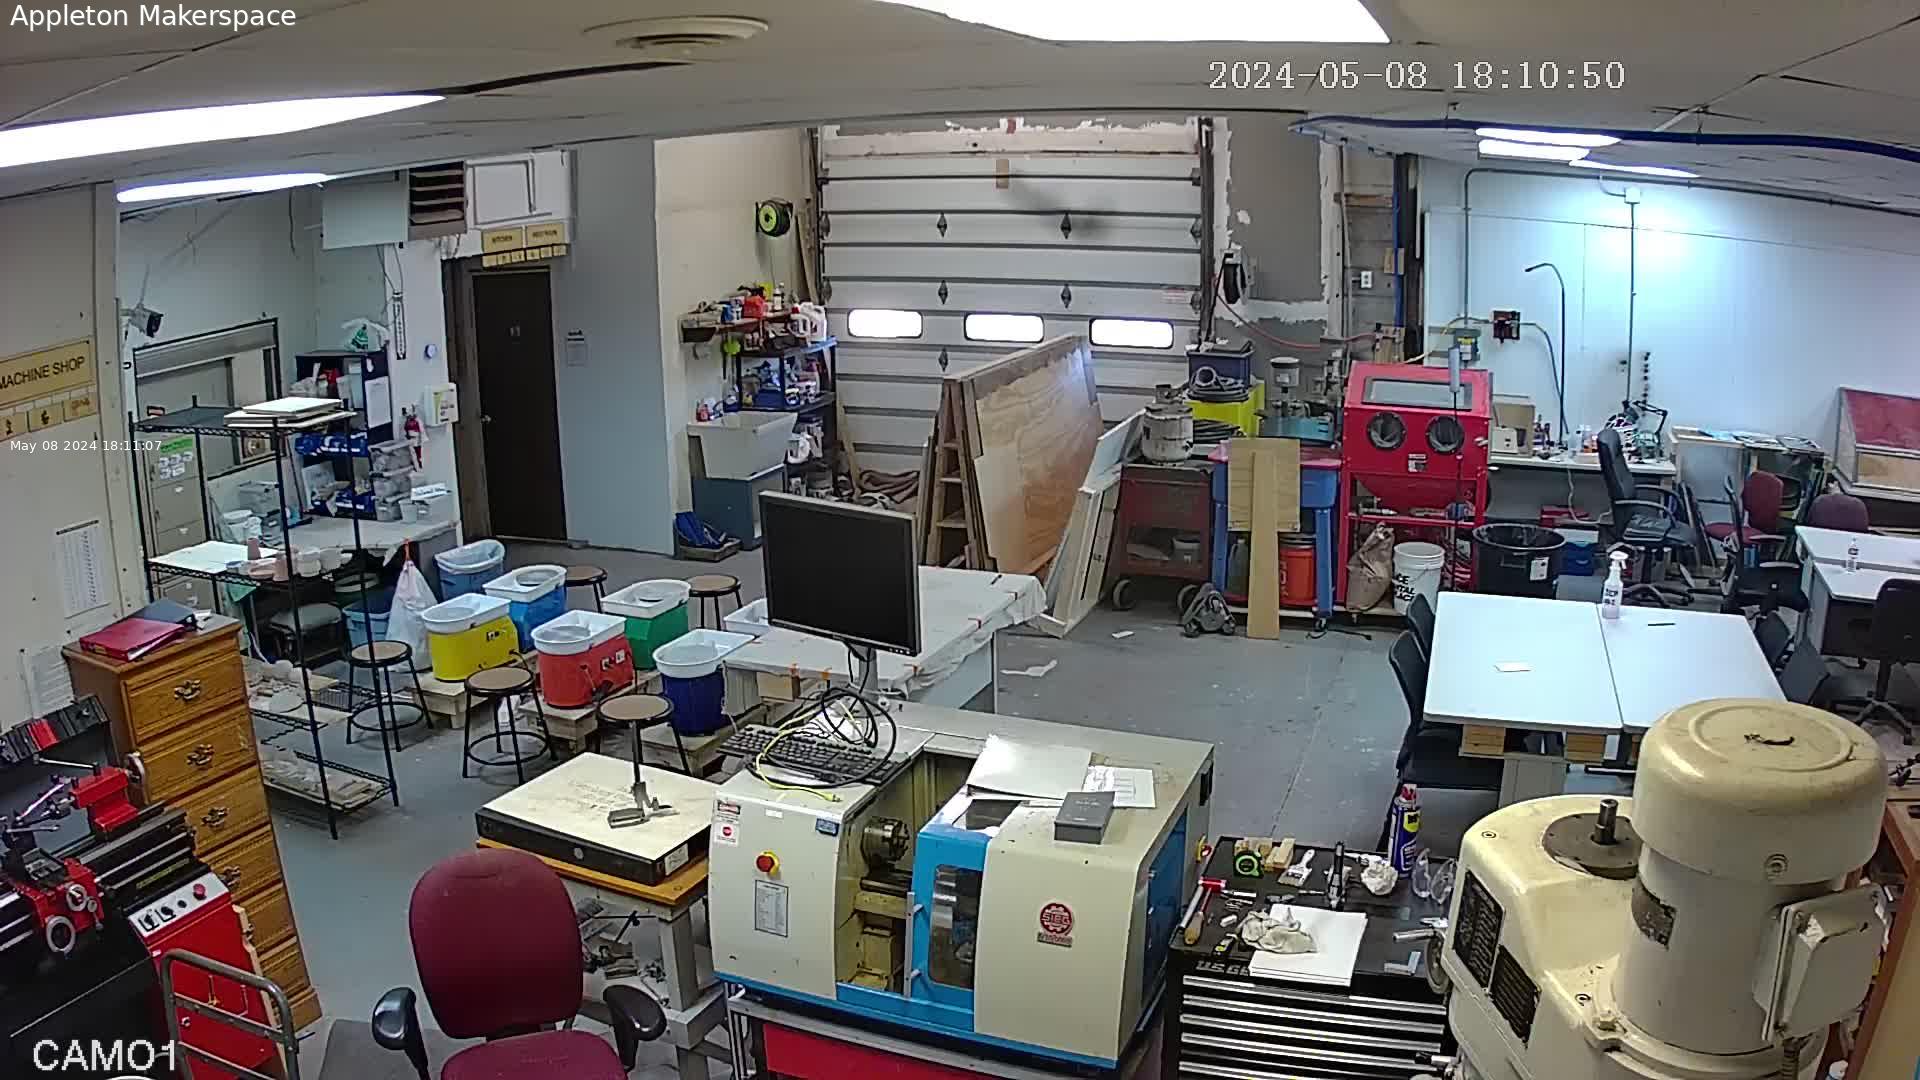 Photo of the Appleton Makerspace